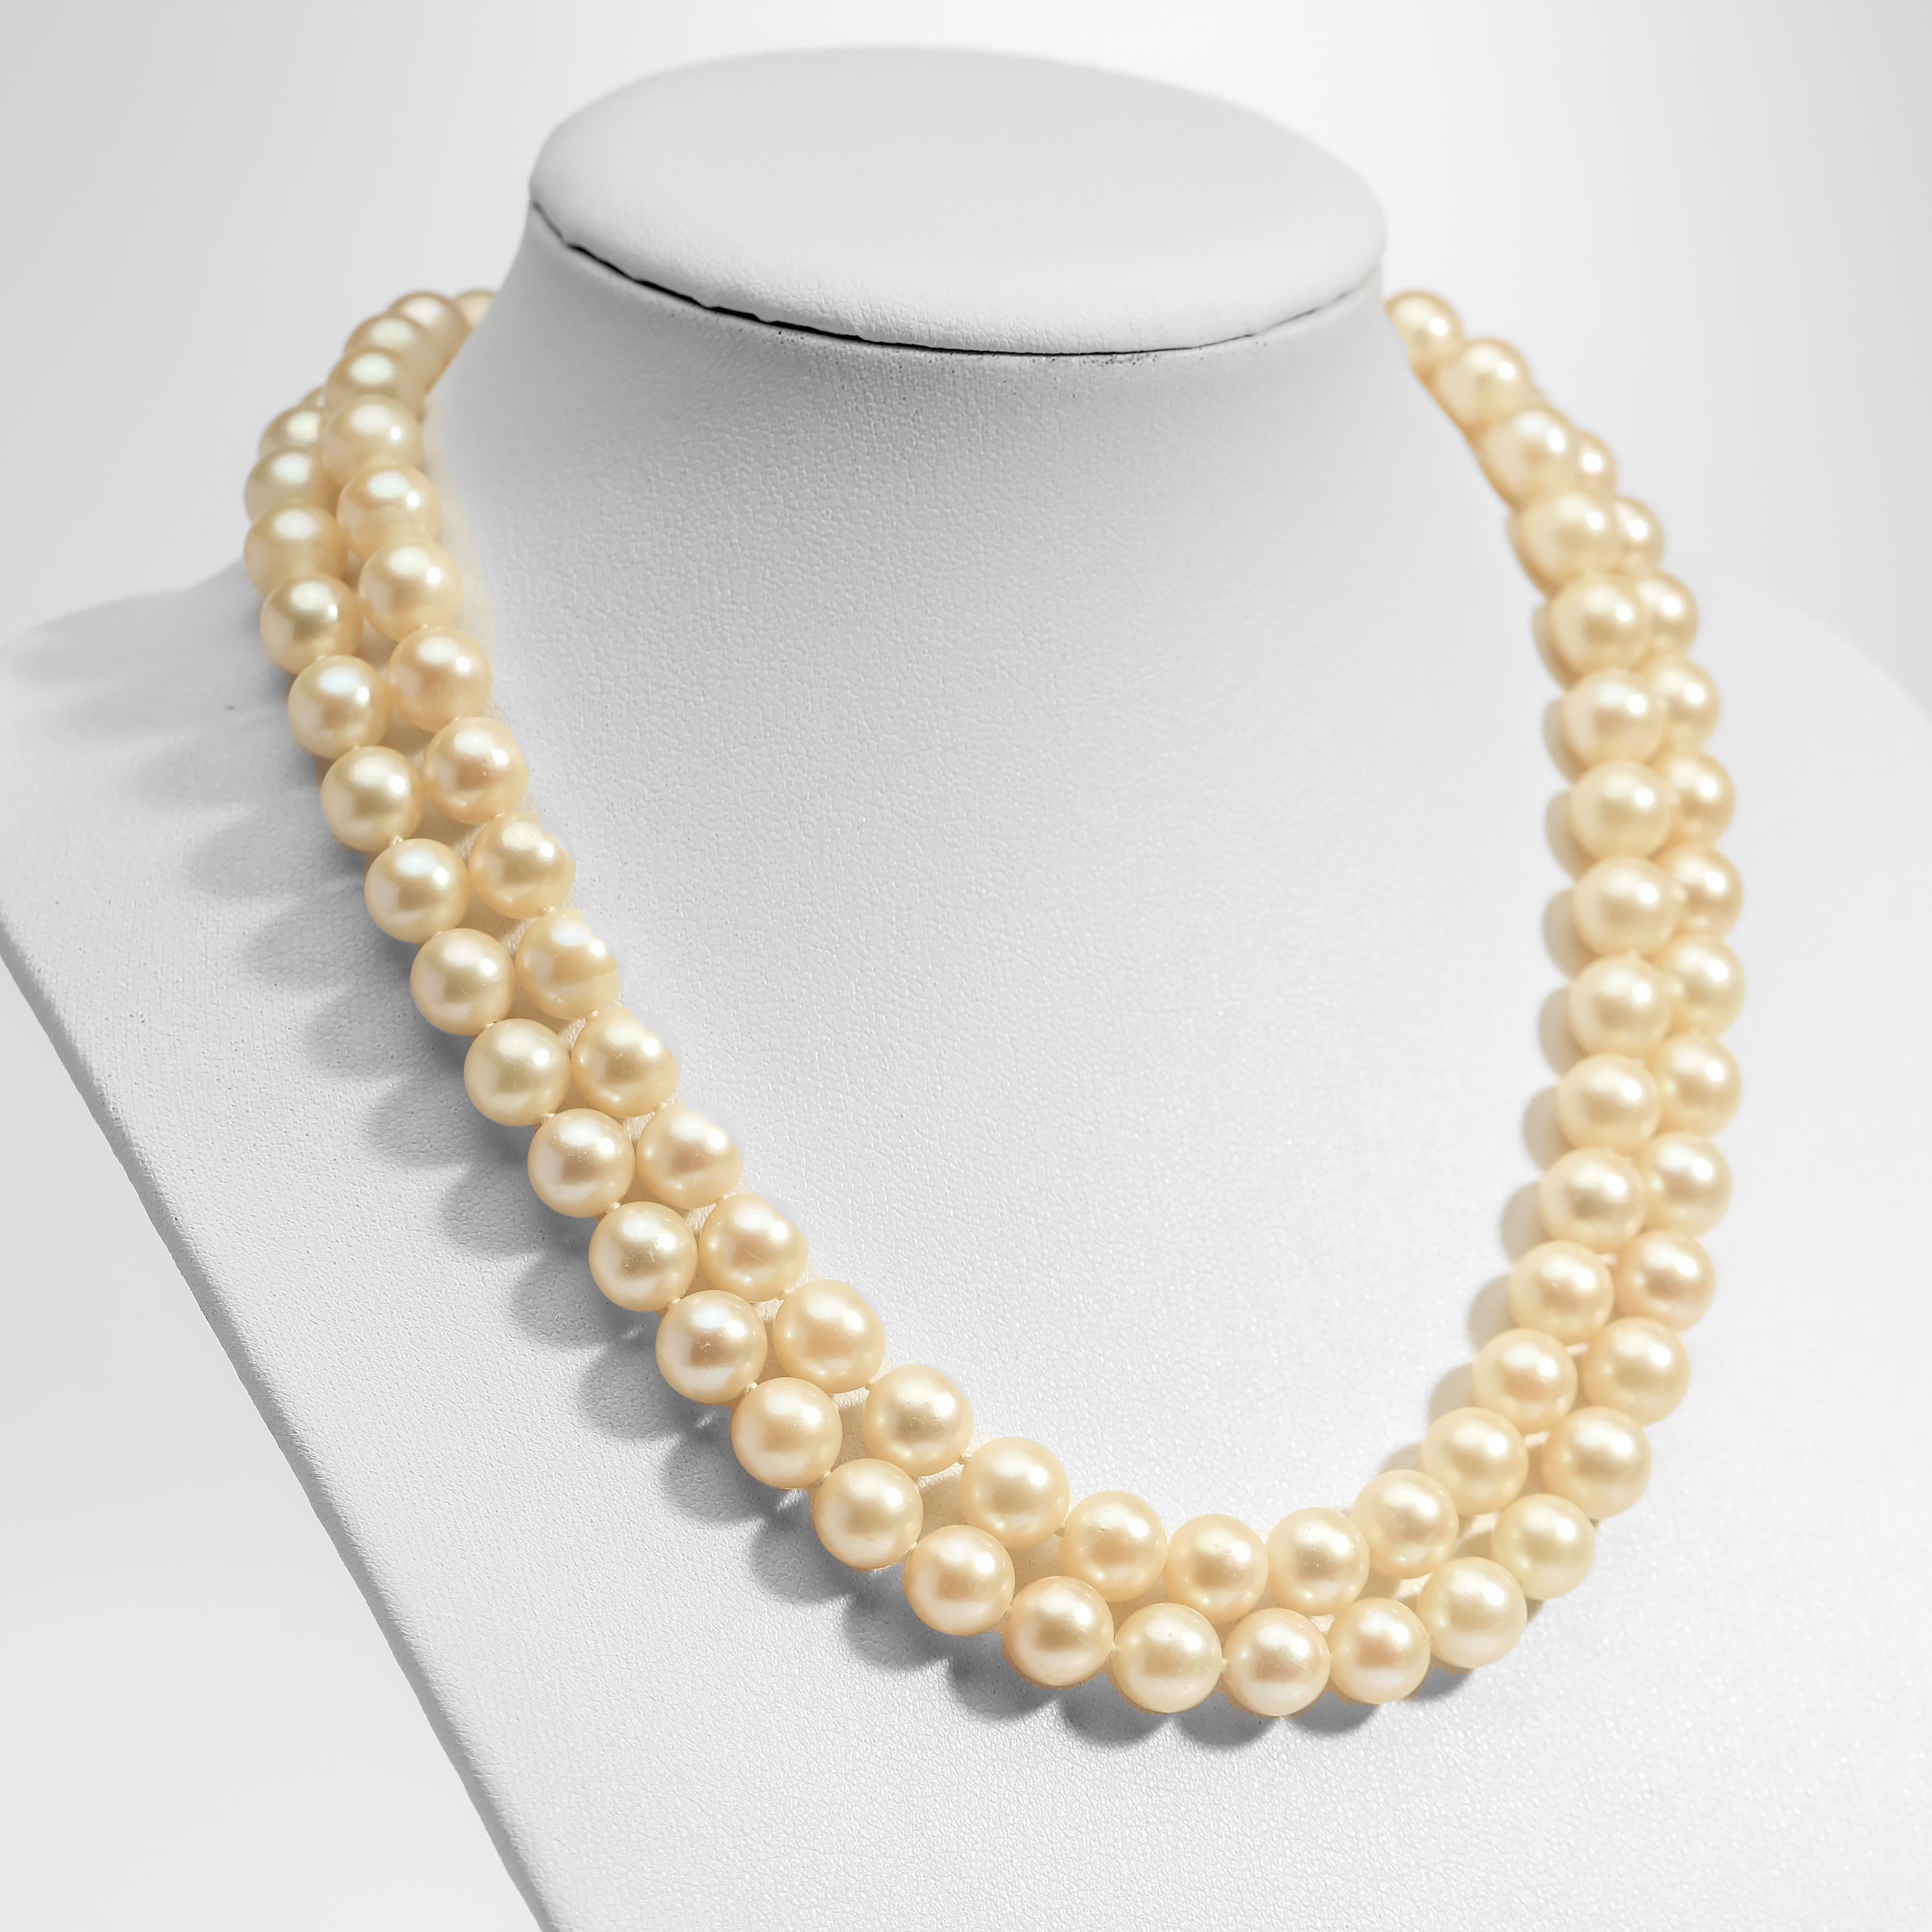 A double strand of huge, luxurious warm-toned cultured Akoya pearls -what a treasure!

The most classic, timeless necklace there is: a double strand of large and fine cultured Akoya pearls in golden cream with a soft pink overtone. Akoya cultured